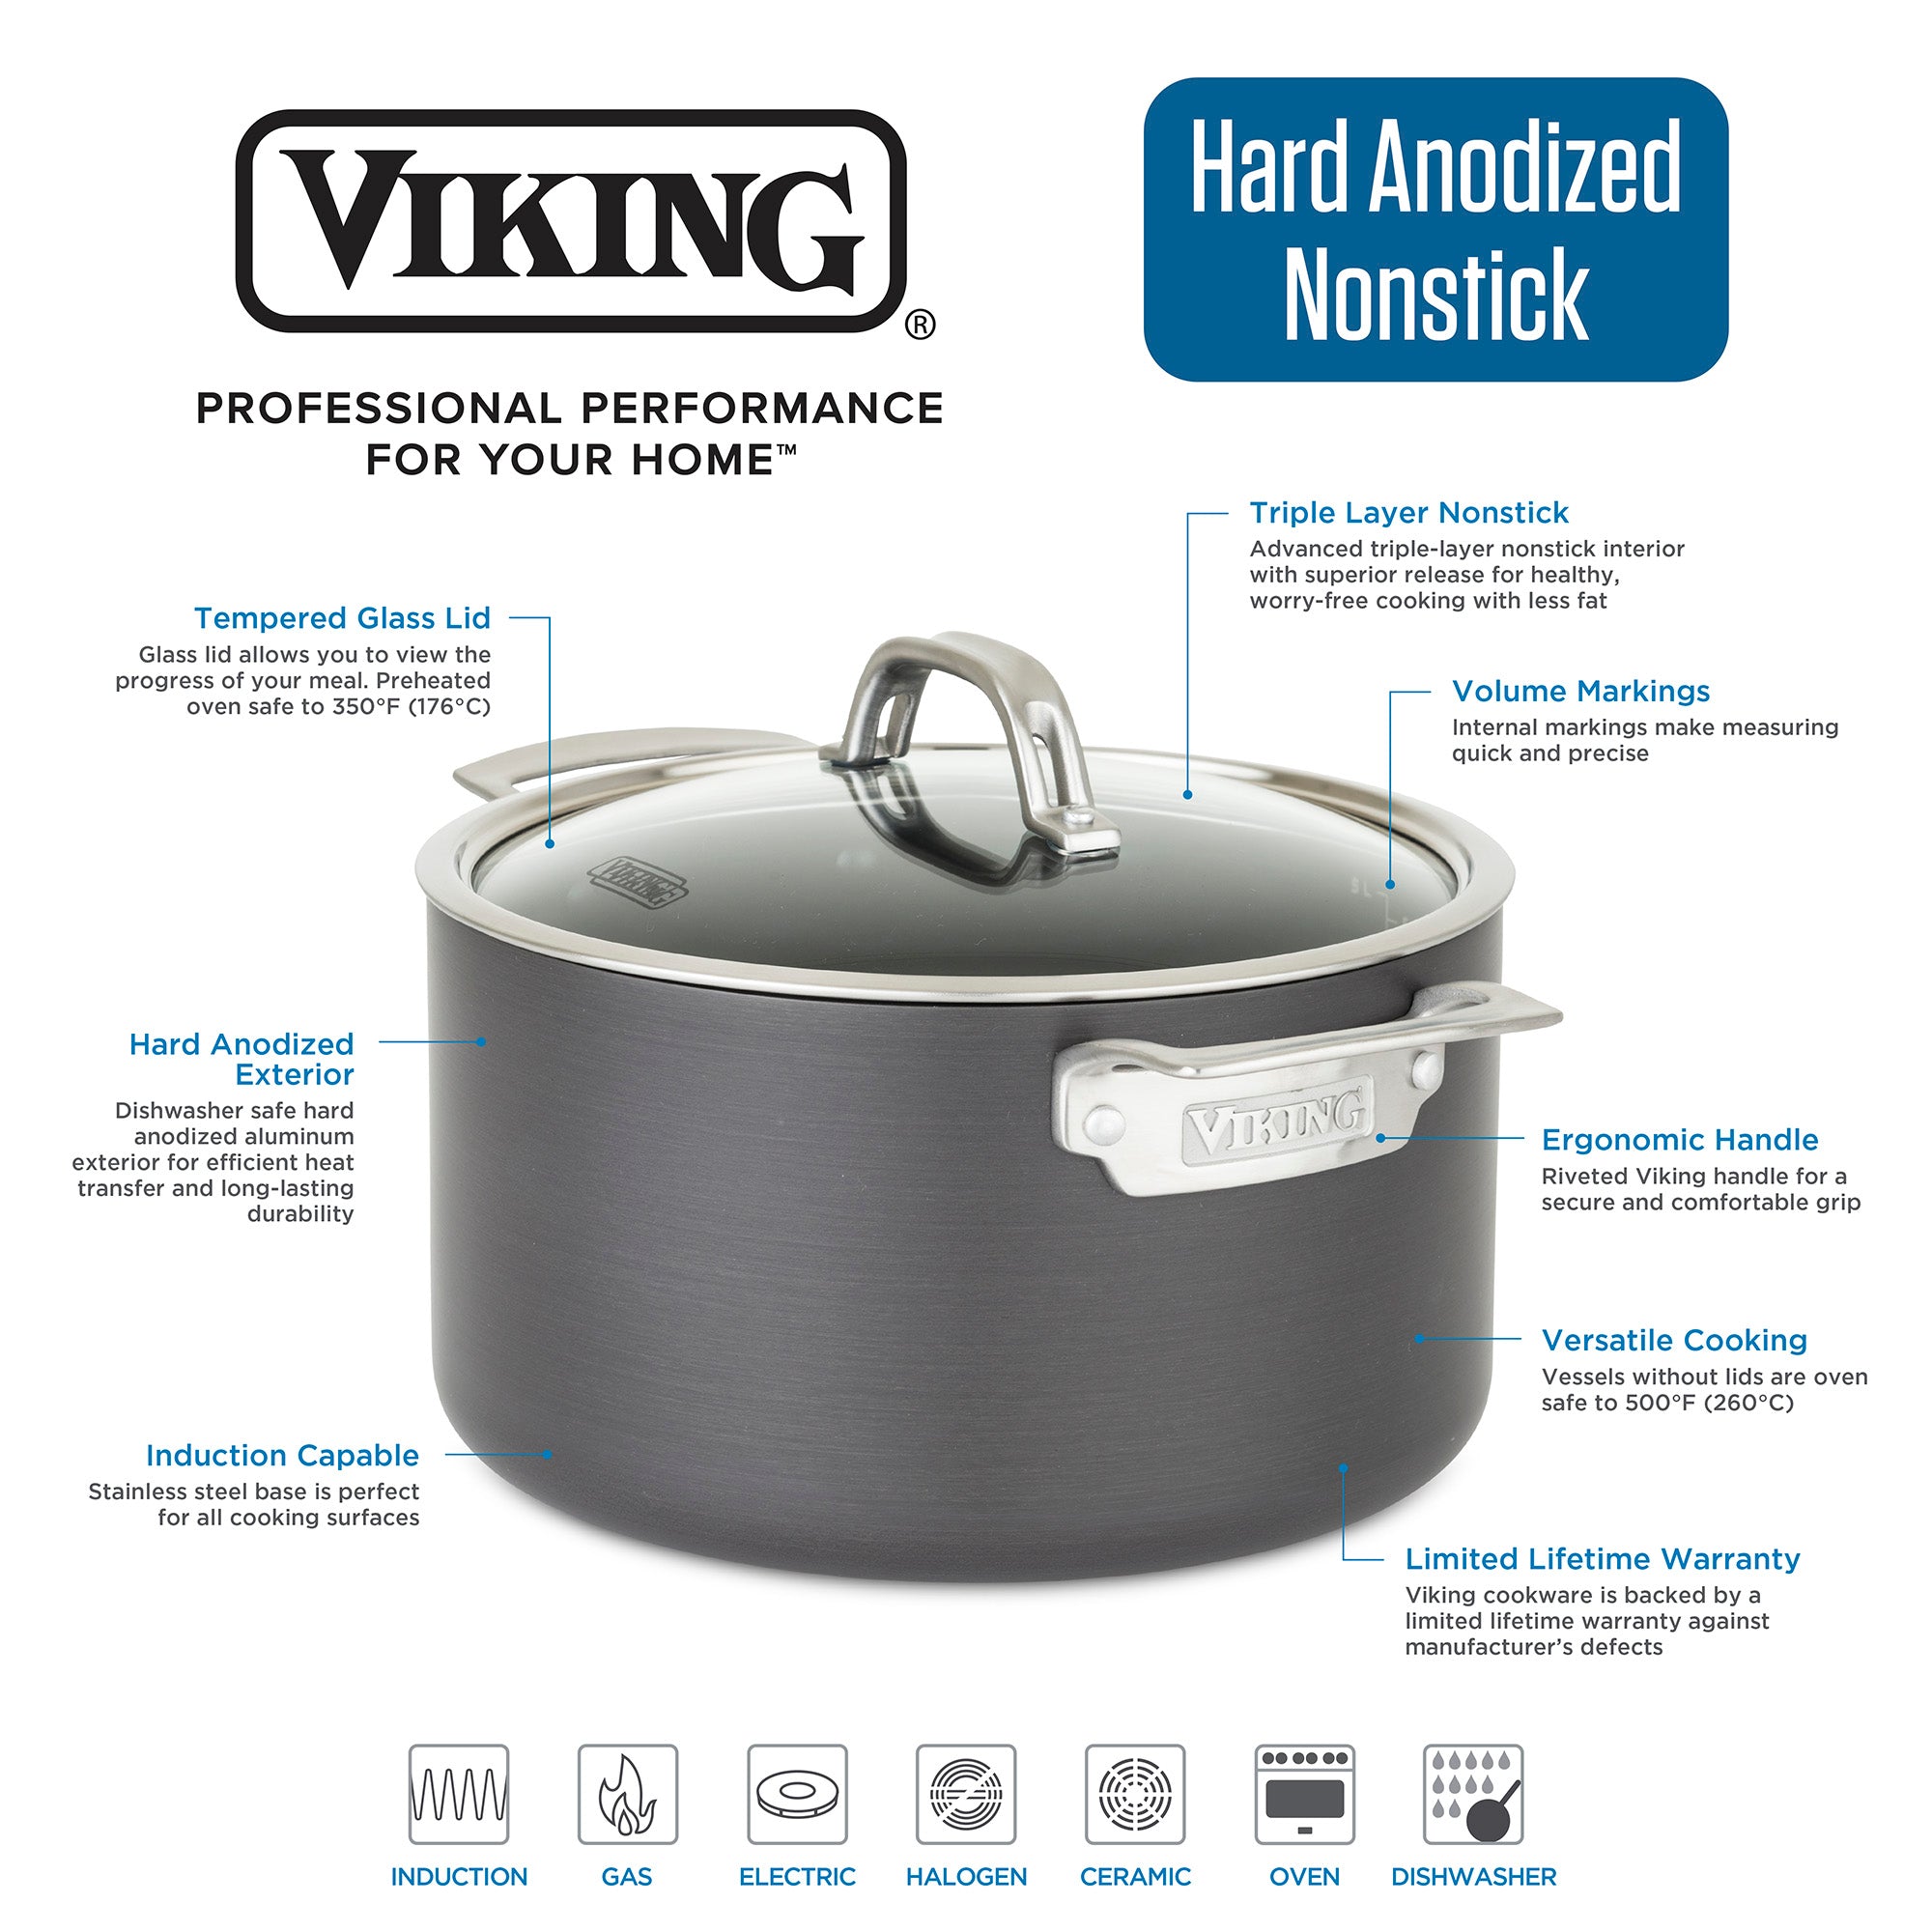  Viking Culinary Hard Anodized Nonstick Fry Pan, 8 inch,  Dishwasher, Oven Safe, Works on All Cooktops including Induction: Home &  Kitchen